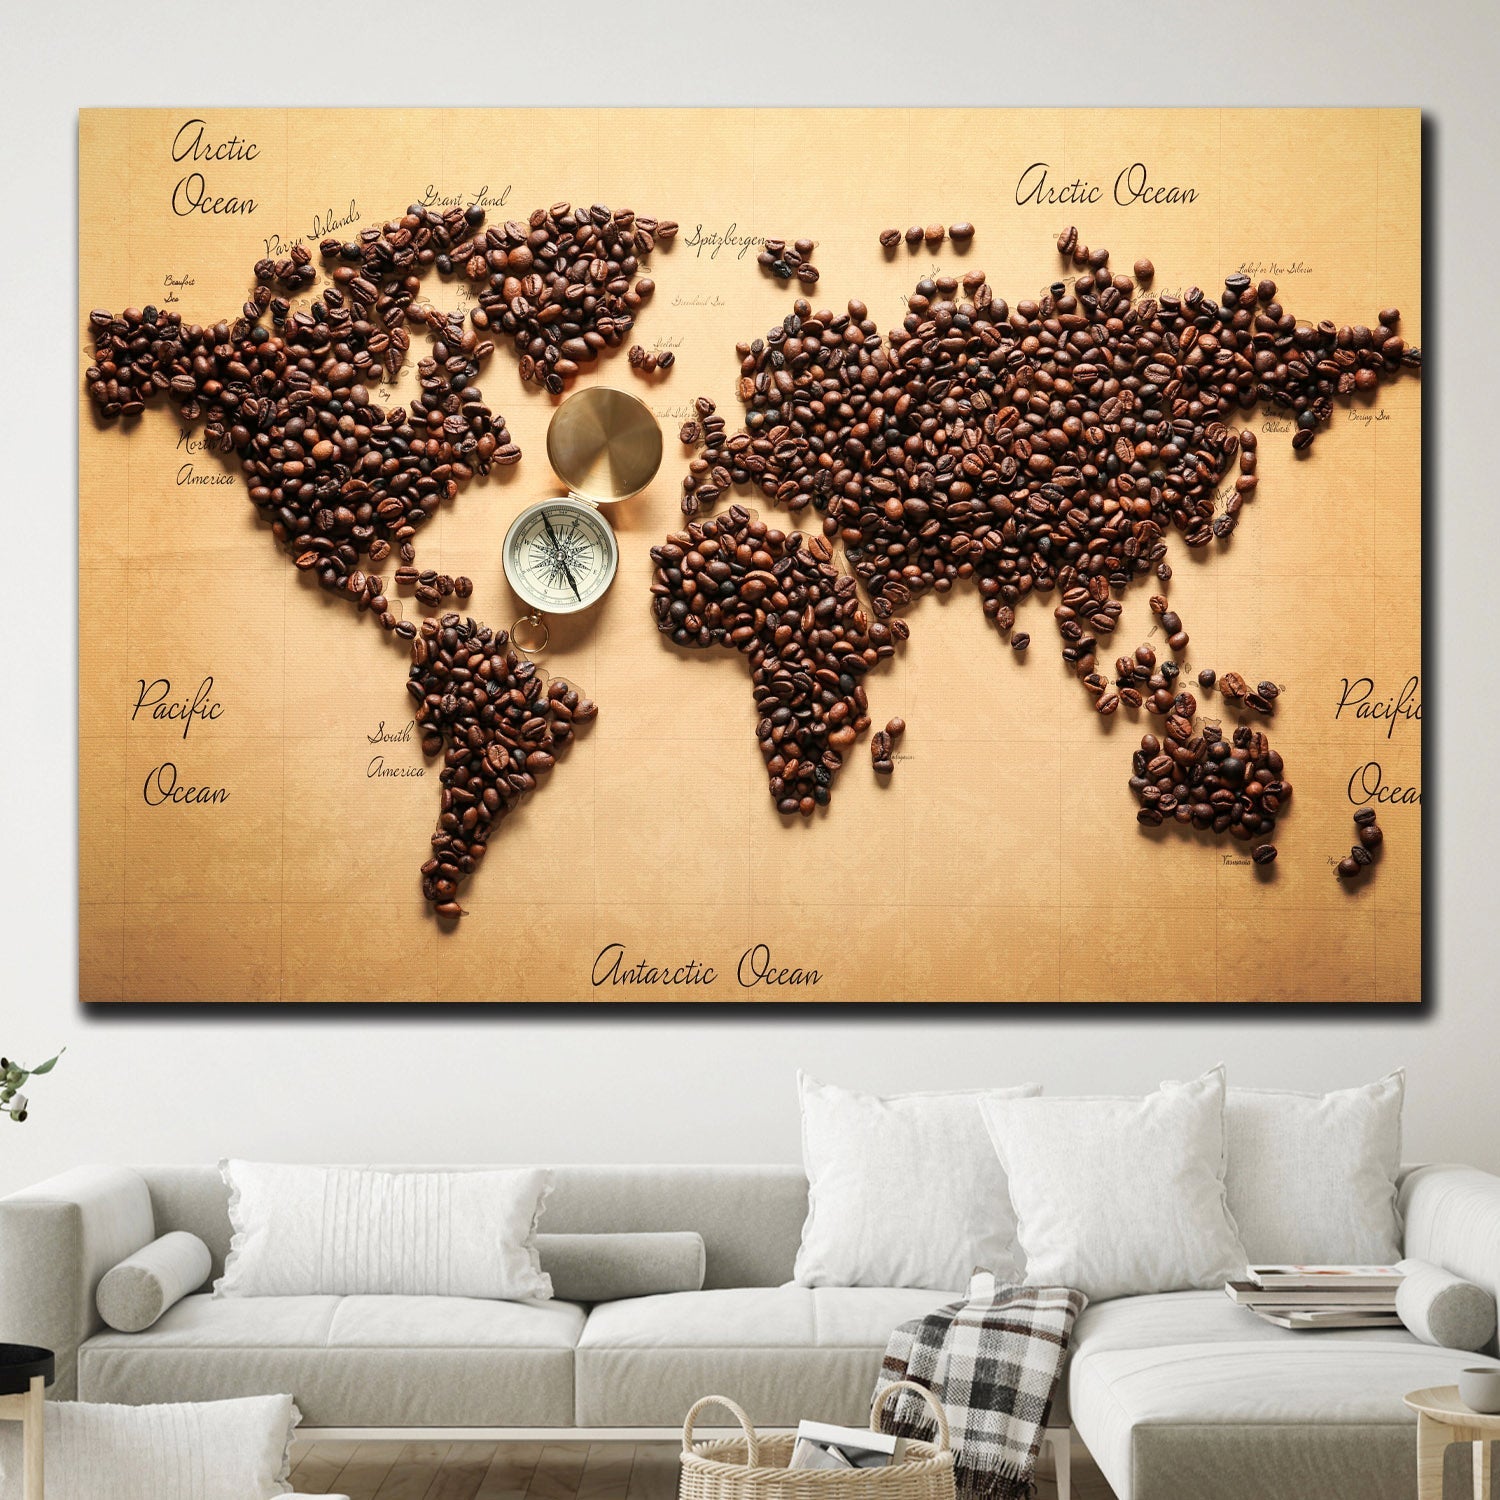 https://cdn.shopify.com/s/files/1/0387/9986/8044/products/WorldMapwithCoffeeBeansCanvasArtprintStretched-1.jpg